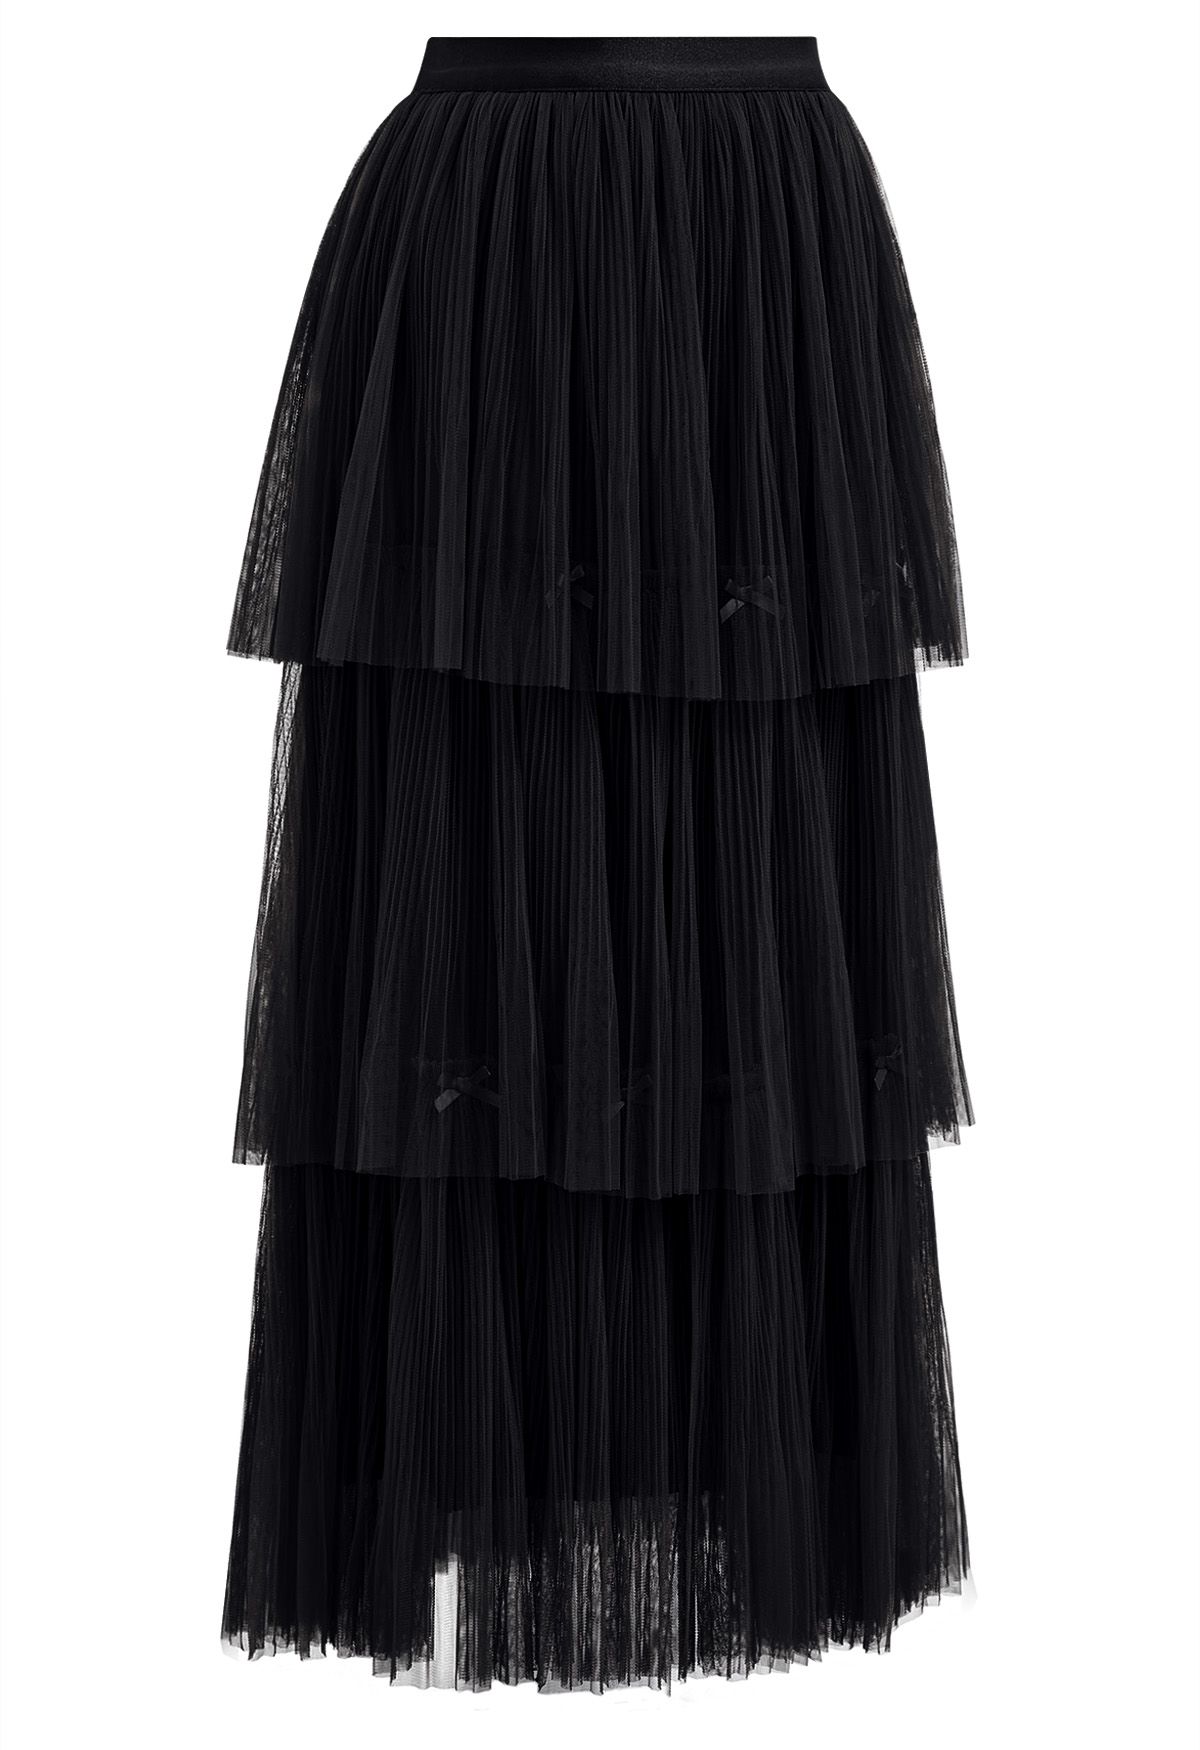 Bowknot Embellished Plisse Tiered Mesh Tulle Skirt in Black